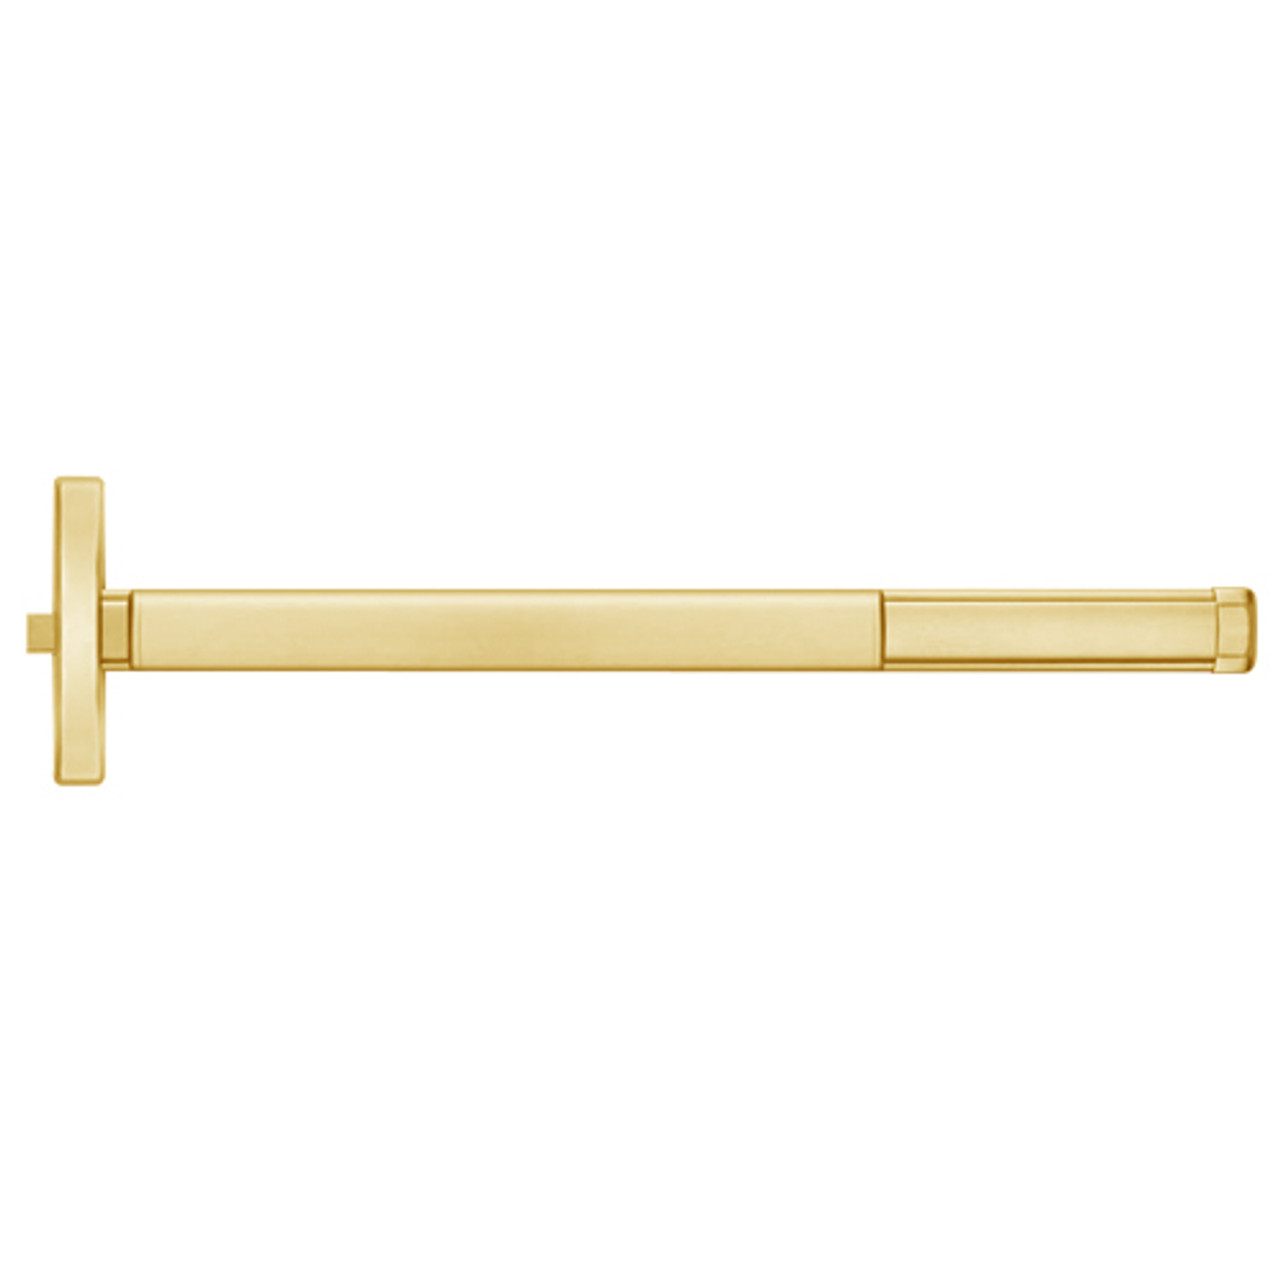 DEFL2414-605-48 PHI 2400 Series Fire Rated Apex Rim Exit Device with Delayed Egress Prepped for Lever Always Active in Bright Brass Finish